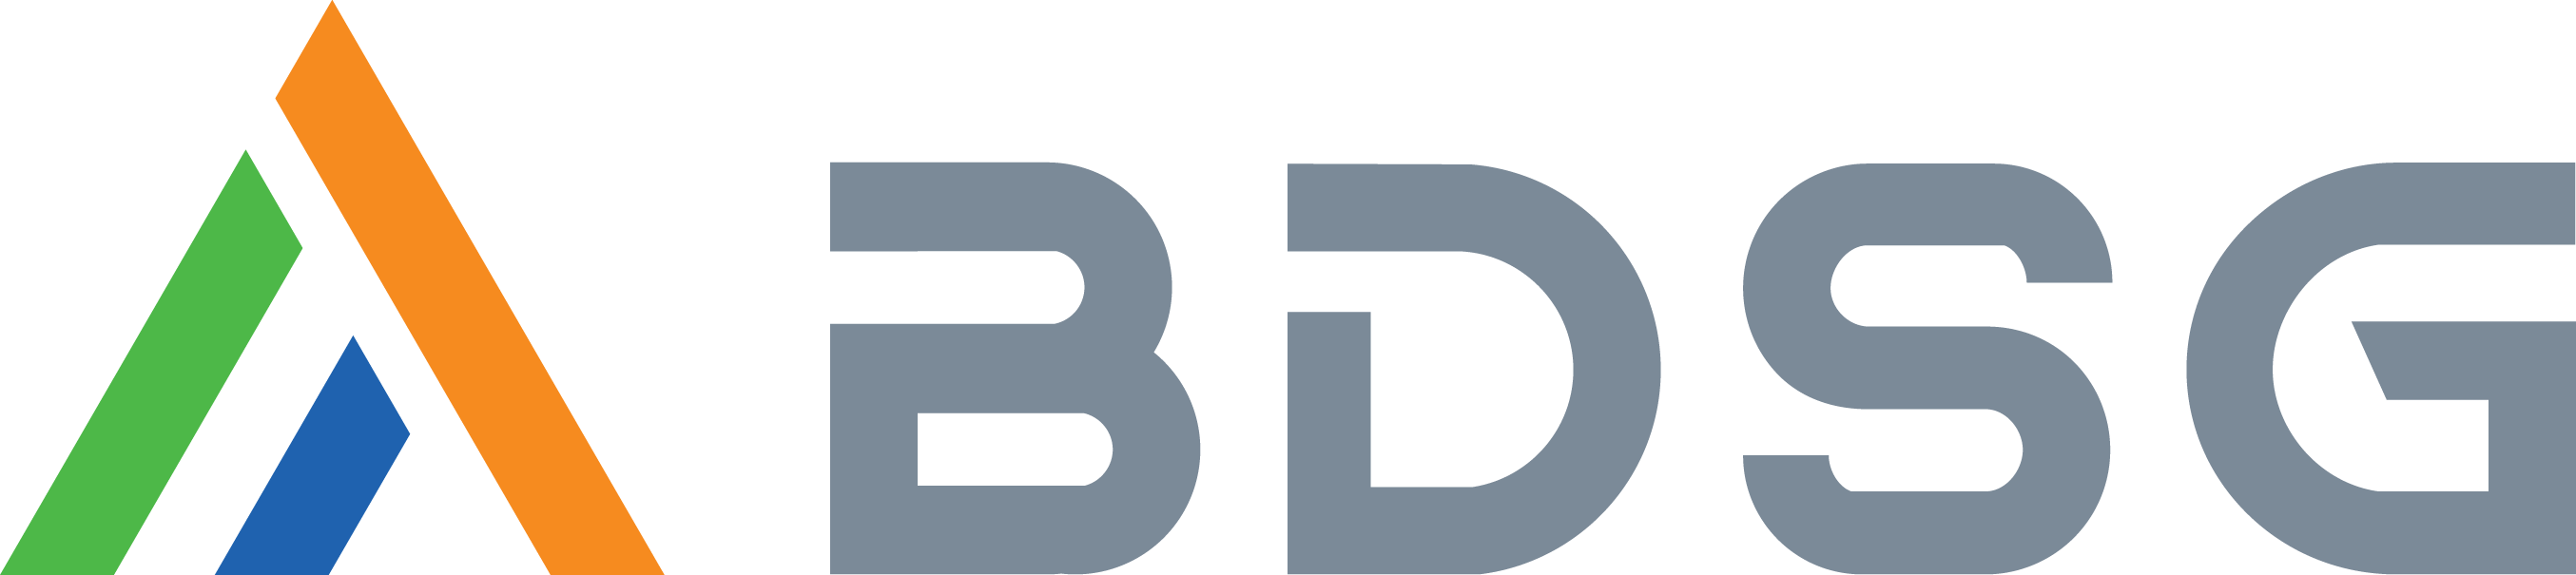 Welcome to BDSG Software